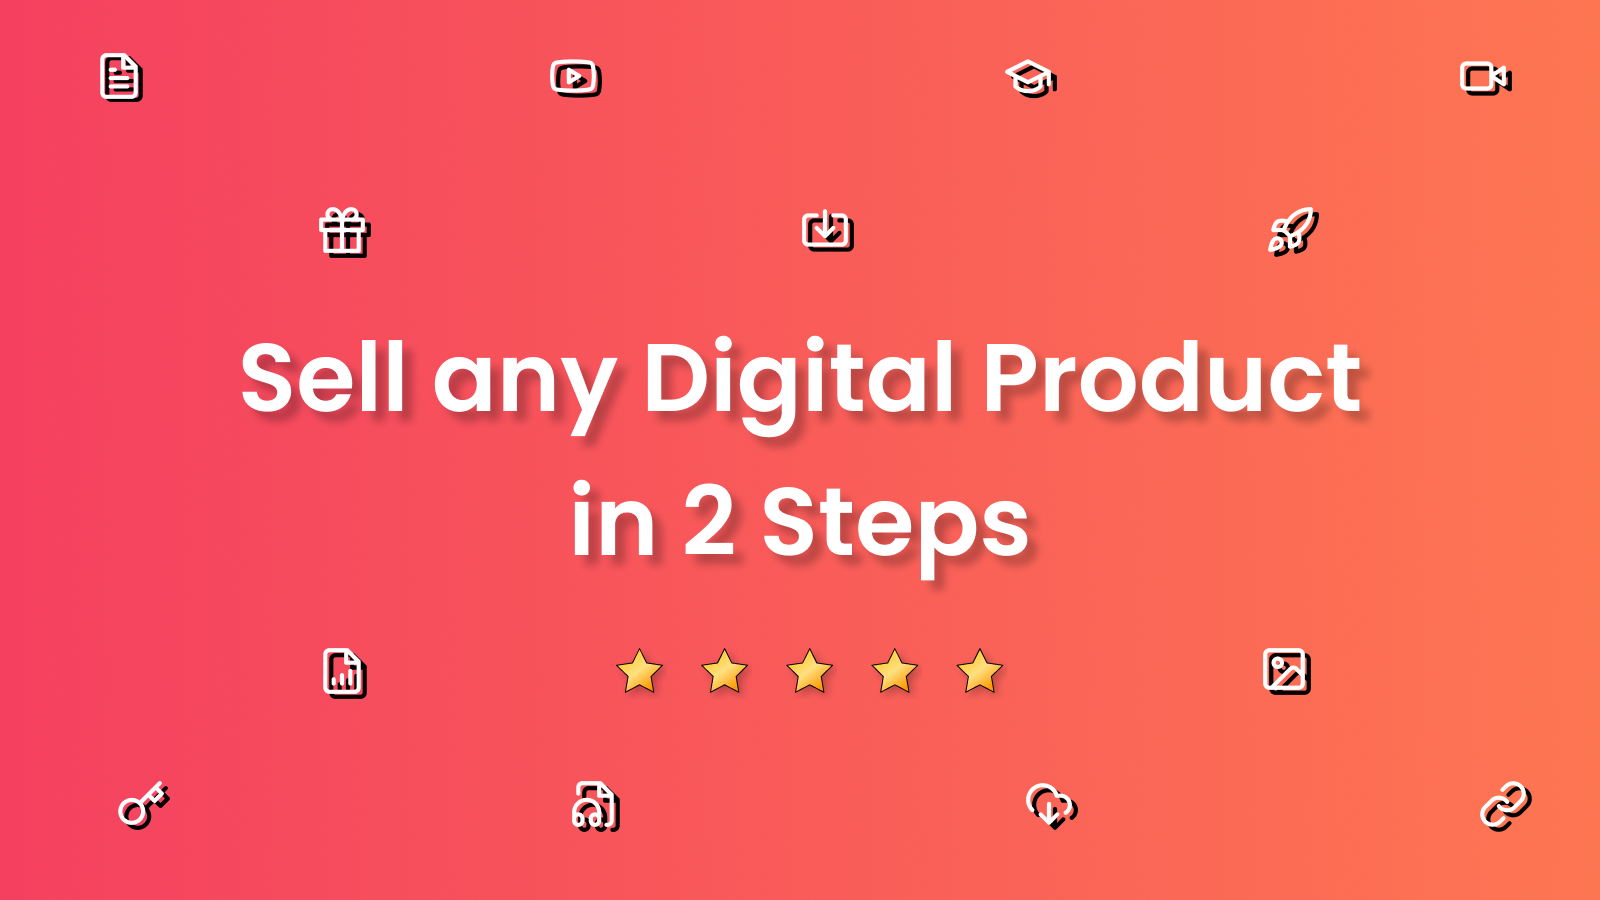 Sell any digital products in 2 steps